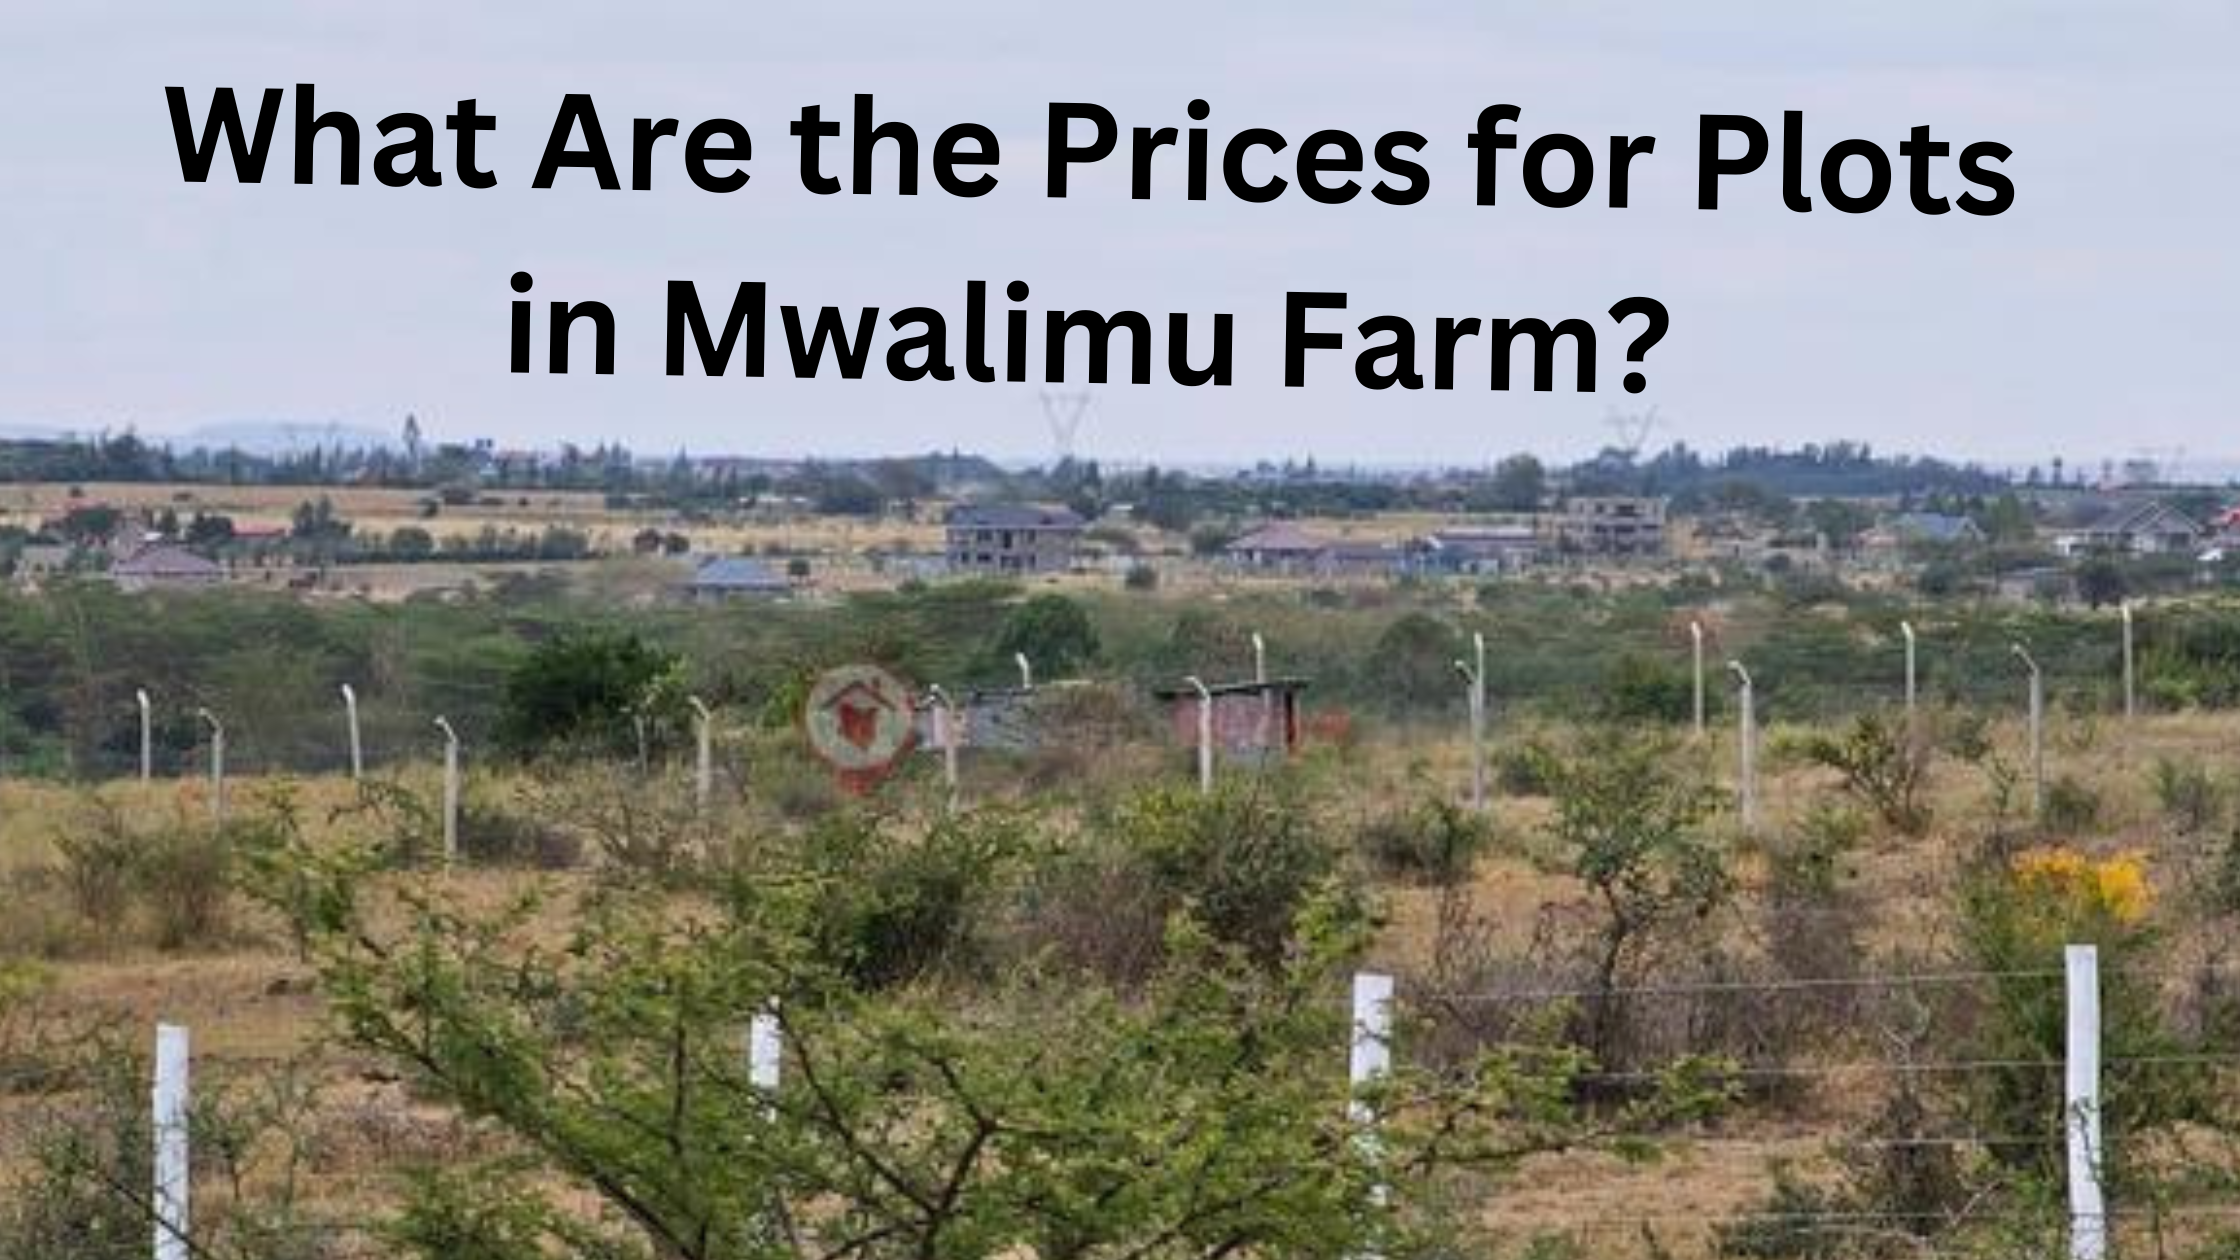 What Are the Prices for Plots in Mwalimu Farm?